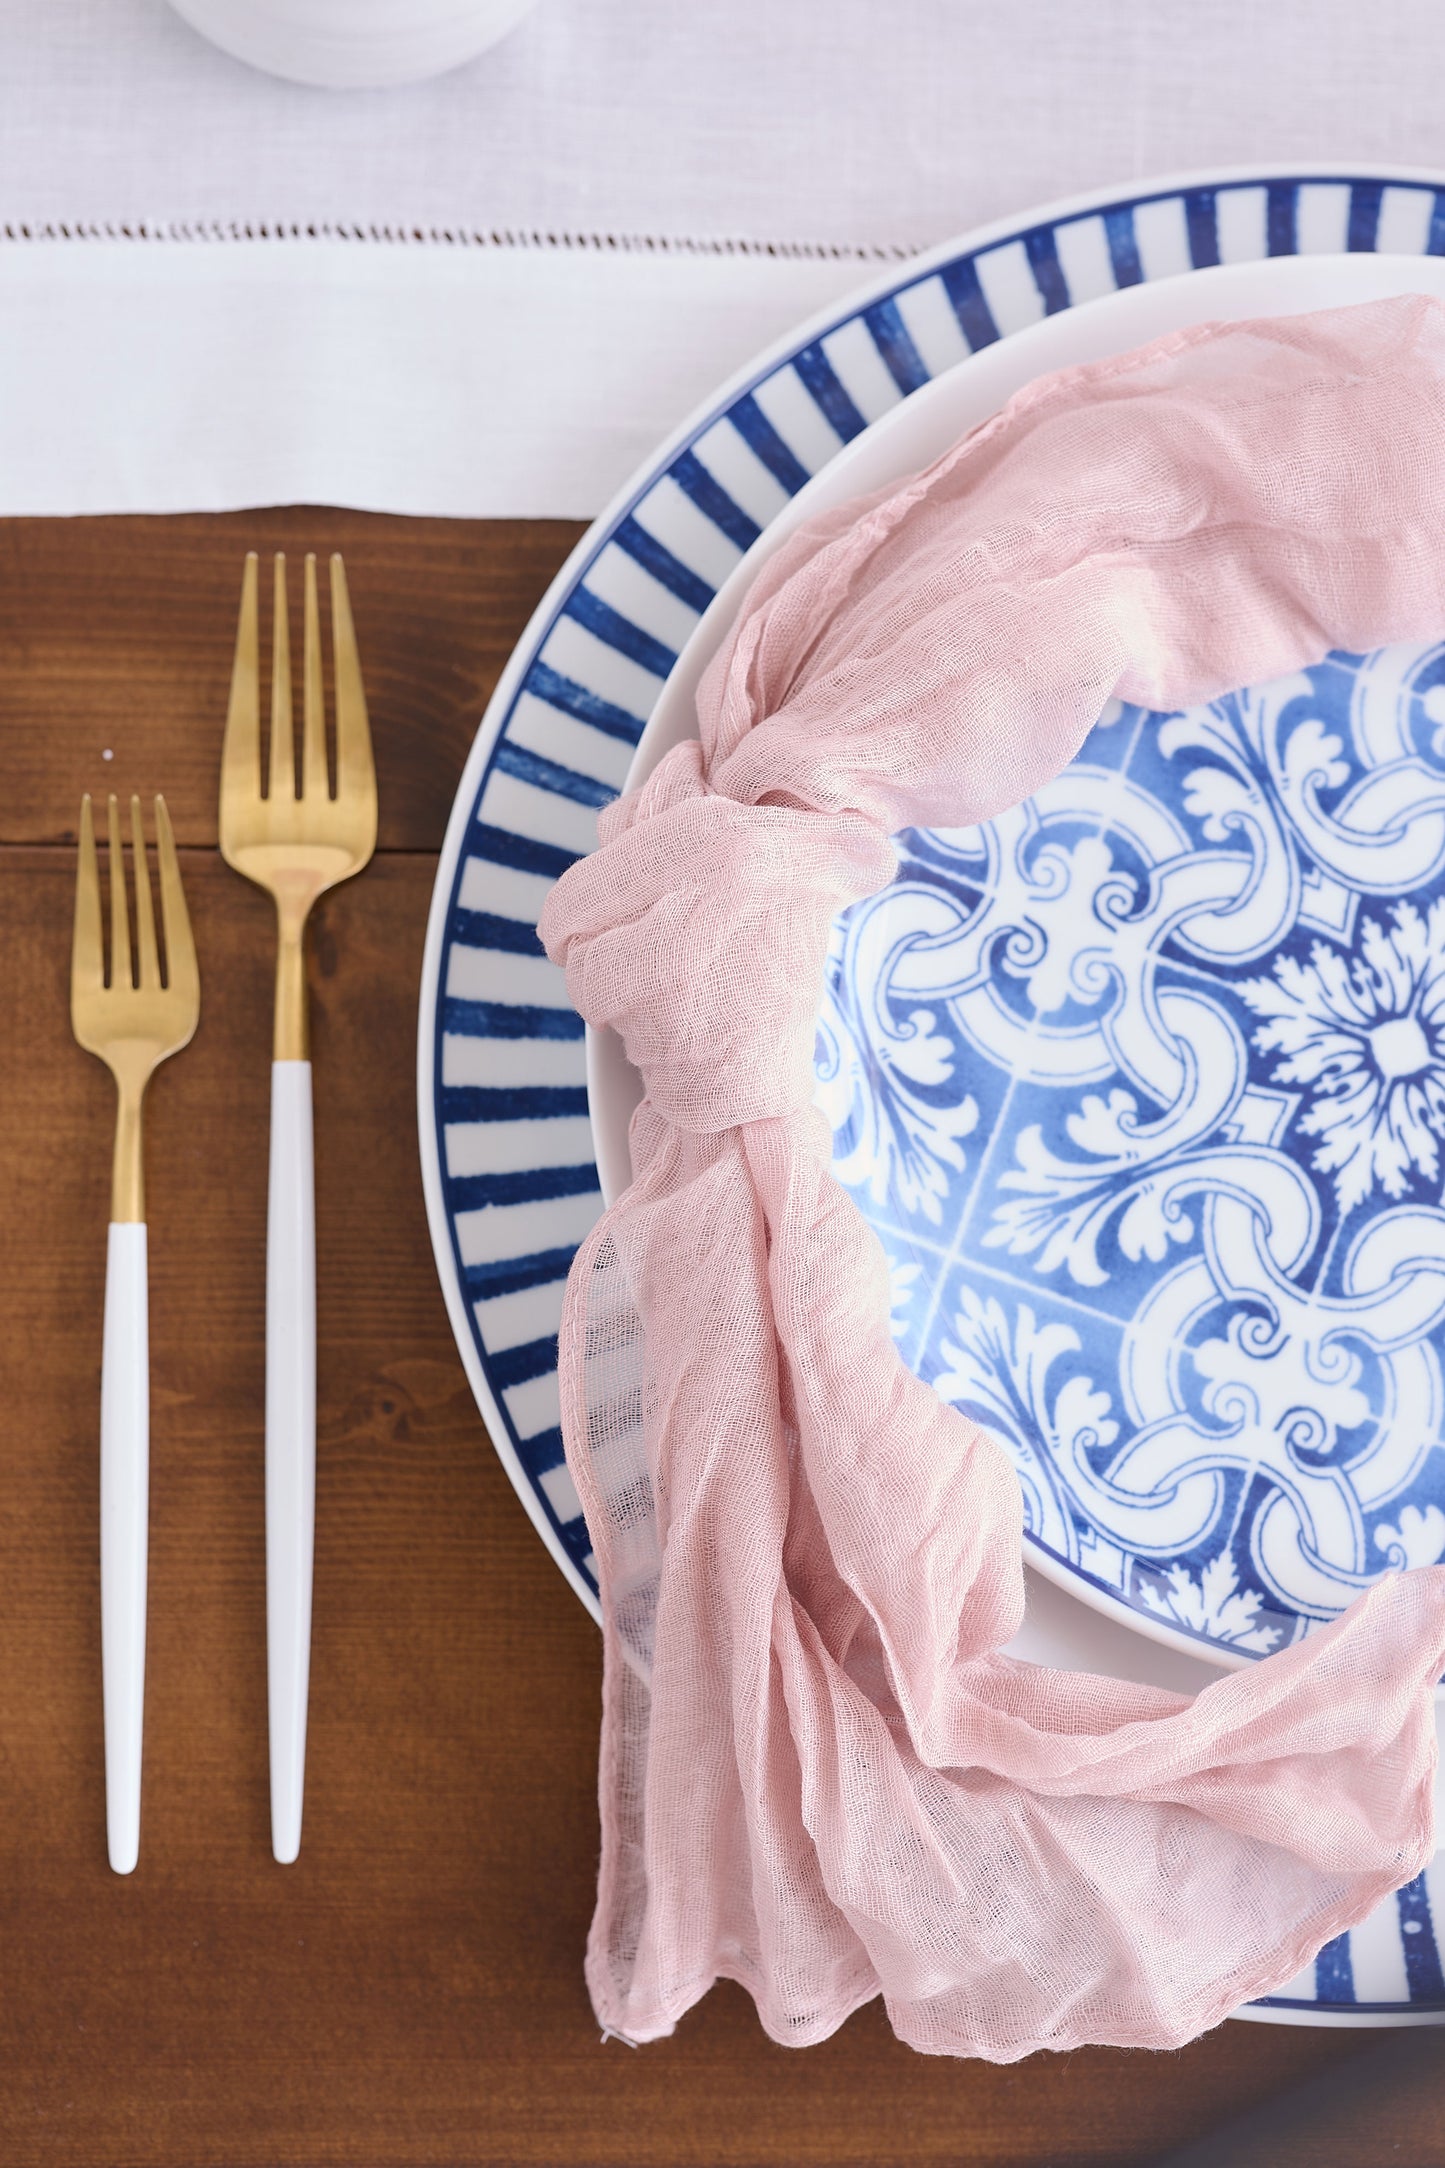 Gold utensils with pink napkin and blue and white dishes.